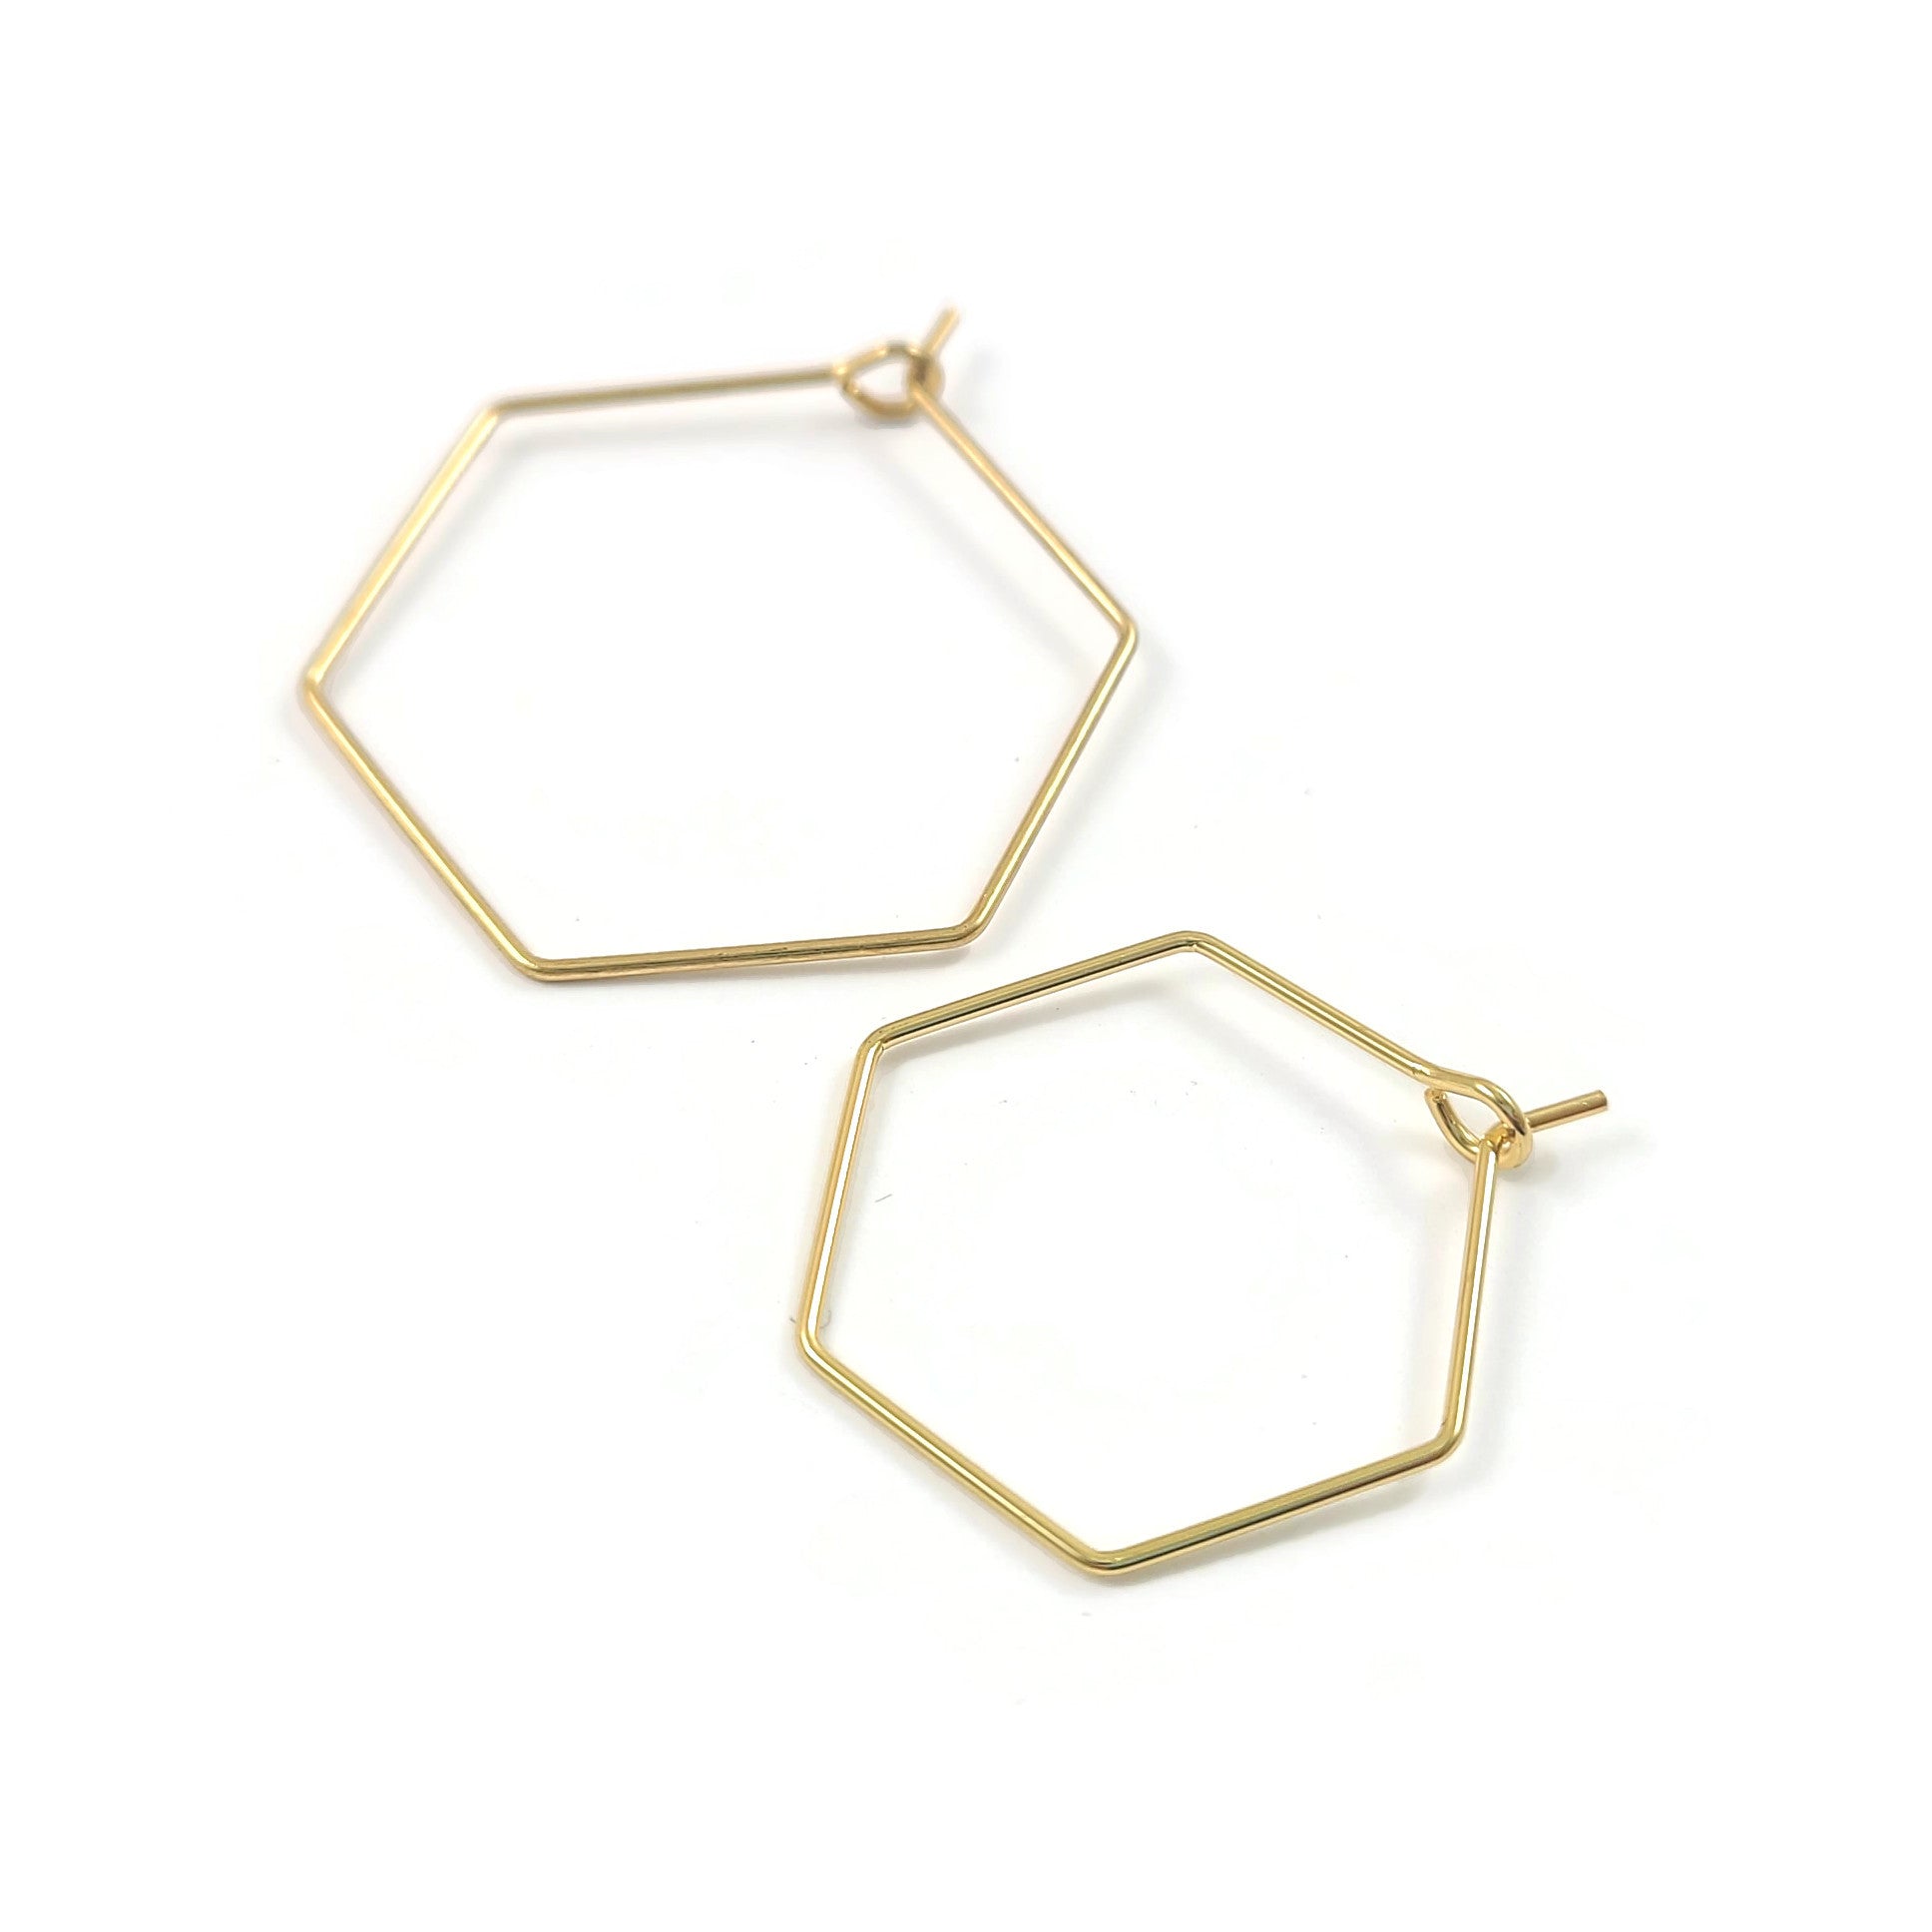 Gold stainless steel hexagon hoops 10pcs (5 pairs) - 2 size available